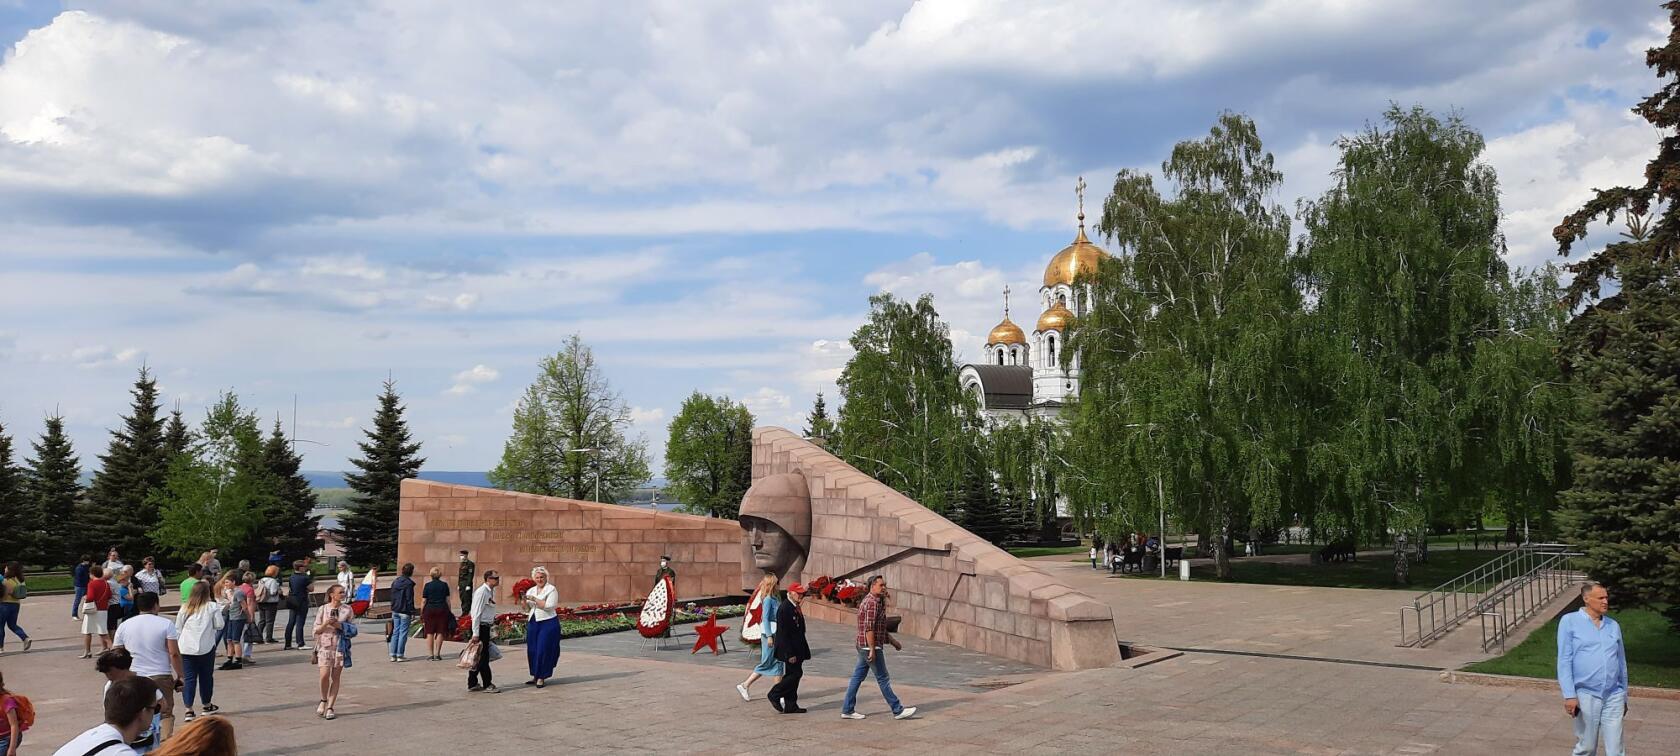 Reply to the post Tourism: Samara - My, Tourism, Russia, Samara, The photo, Travel across Russia, Vacation, Relaxation, The Great Patriotic War, Evacuation, Old buildings, The street, Travels, sights, Volga river, Reply to post, Longpost